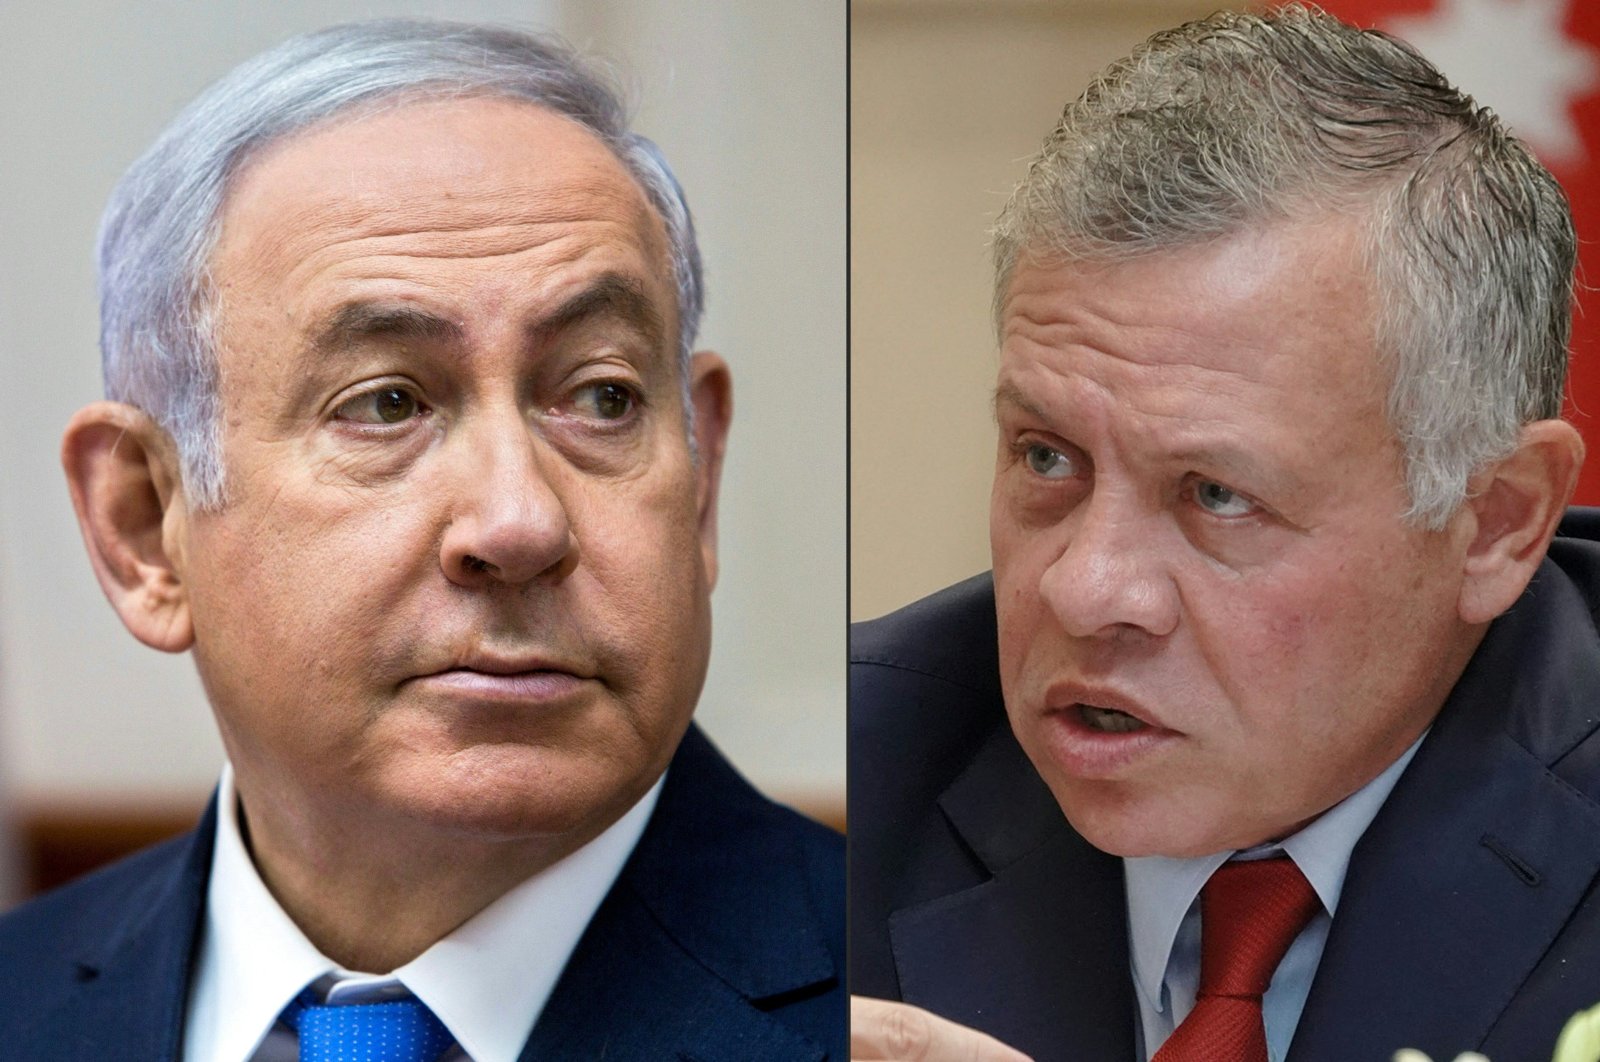  This file combo photo created on Oct. 21, 2018 shows Israeli Prime Minister Benjamin Netanyahu (L) attending a cabinet meeting at his office in Jerusalem on July 29, 2018; and a handout picture released by the Jordanian Royal Palace on Oct. 21, 2018, showing Jordanian King Abdullah II speaking during a meeting with local political figures in the capital Amman. (AFP File Photo)